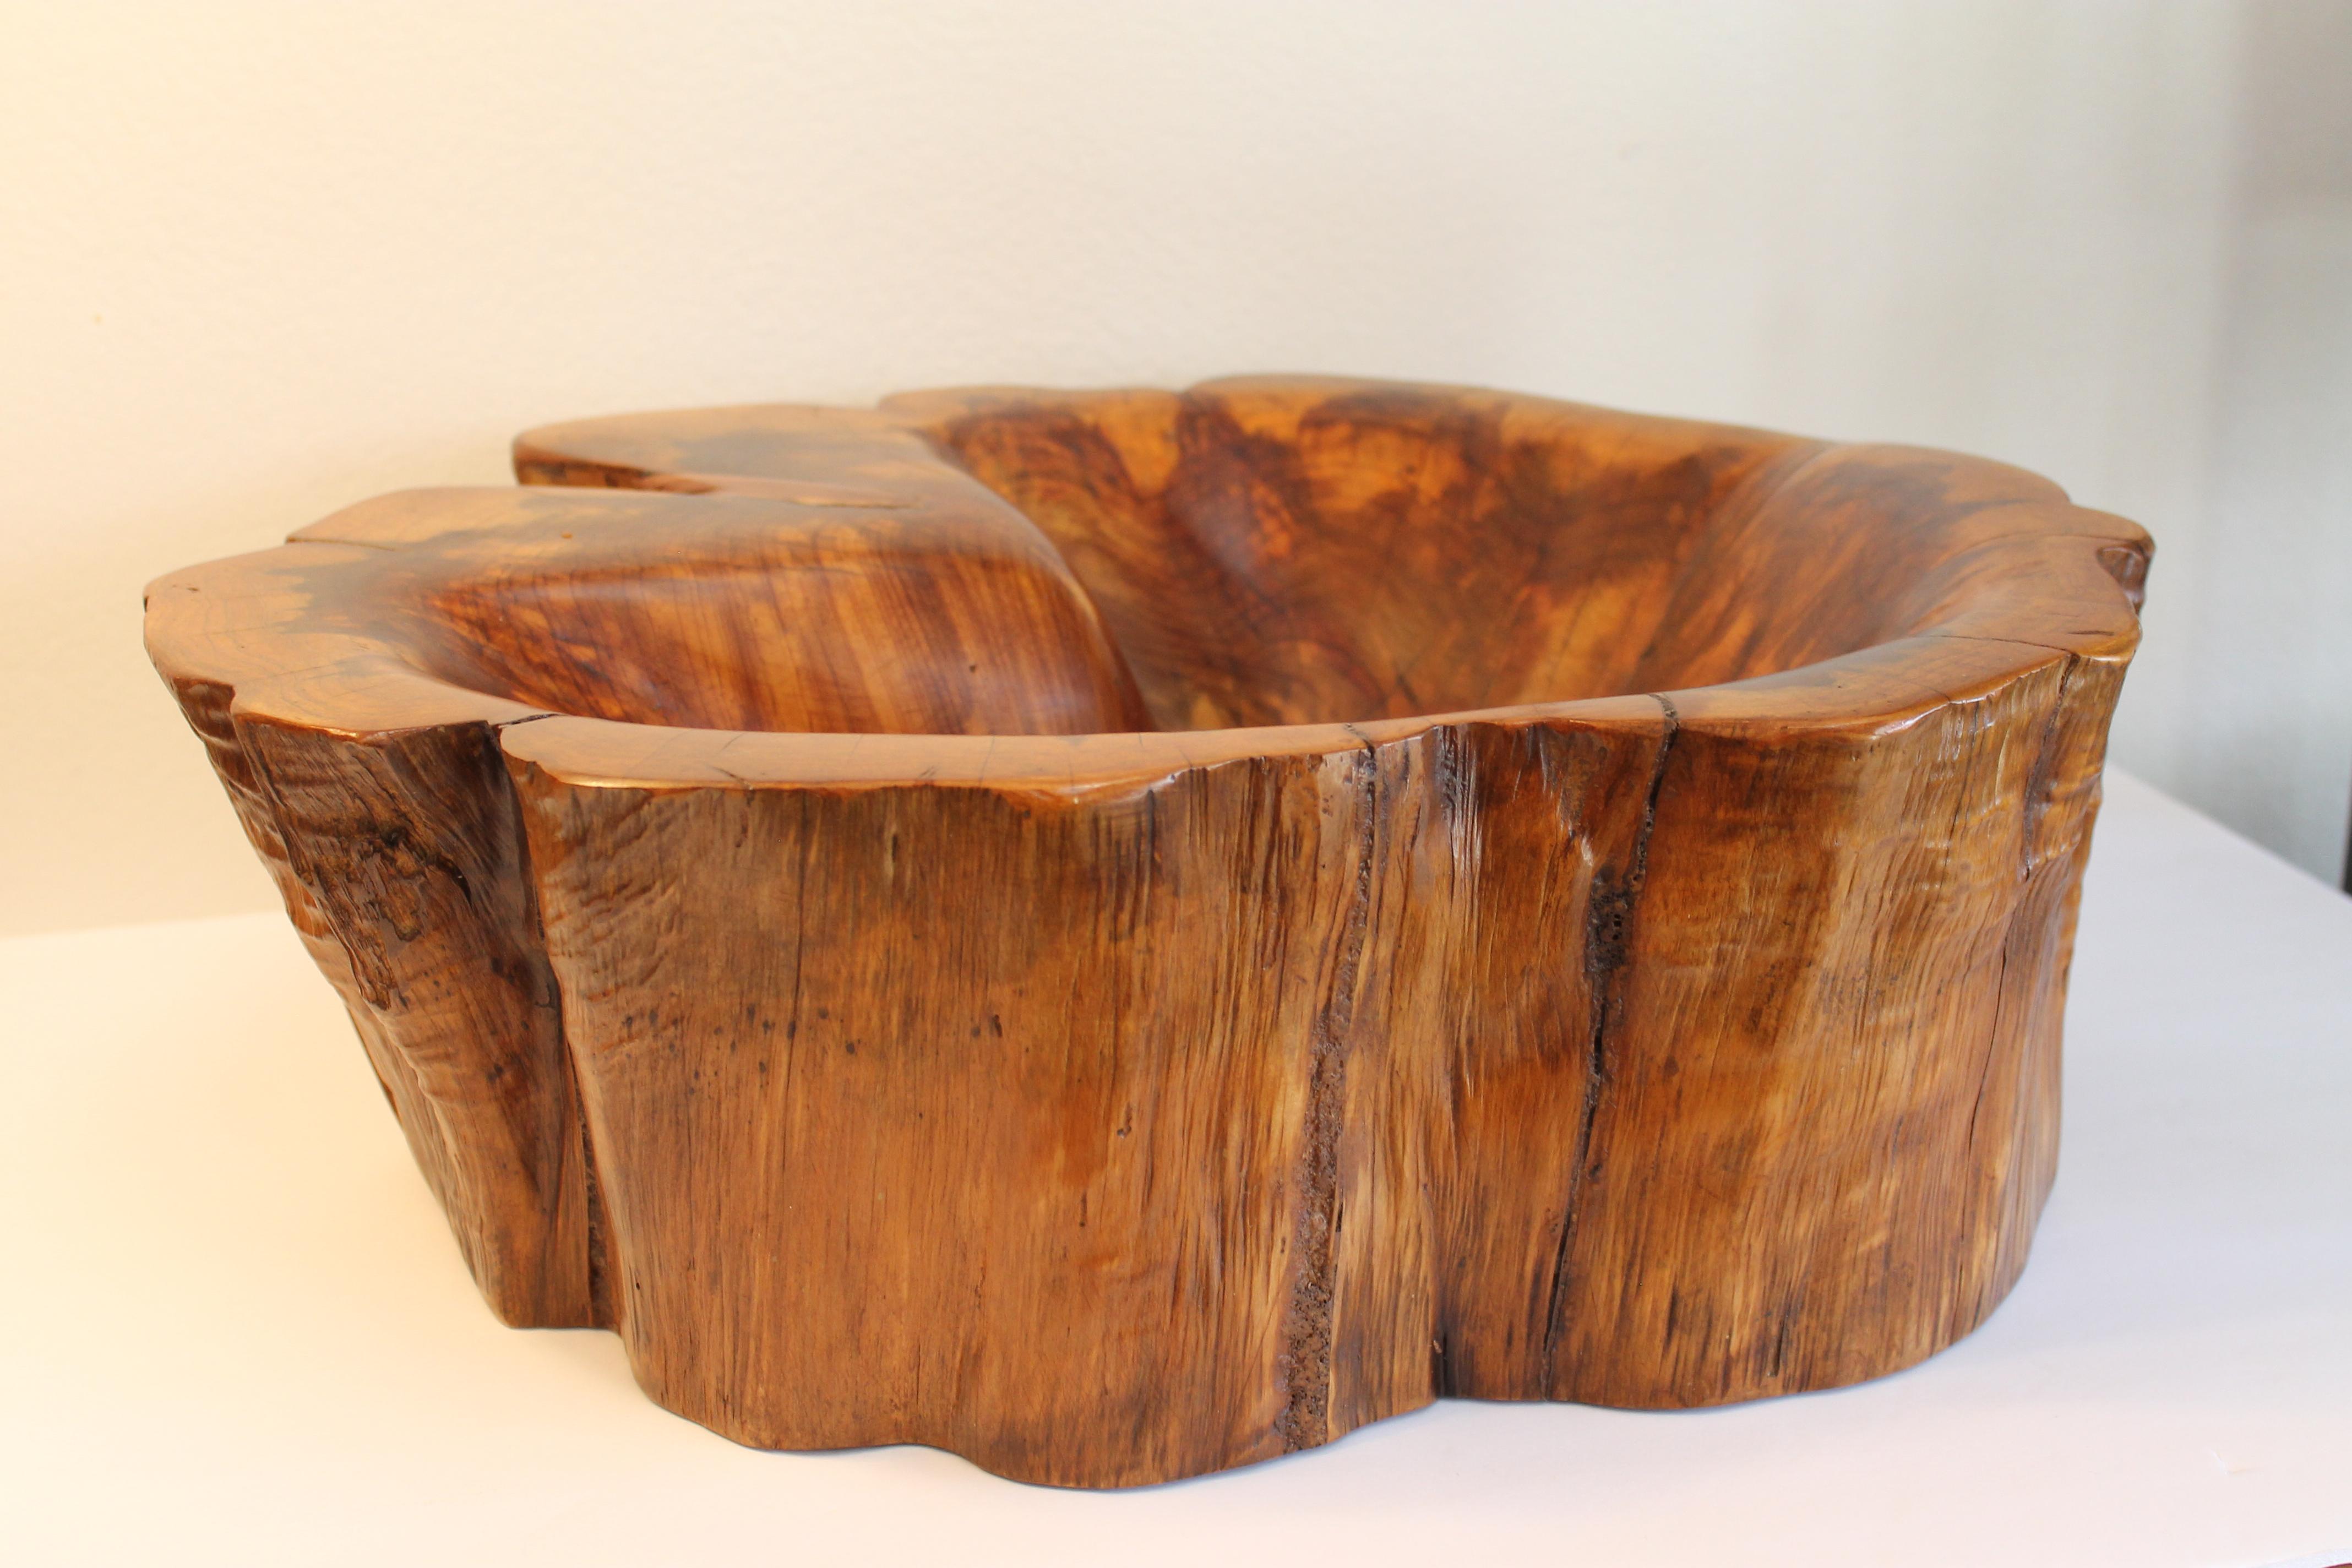 Burl wood bowl. We had the bowl professionally refinished. Bowl measures roughly 19